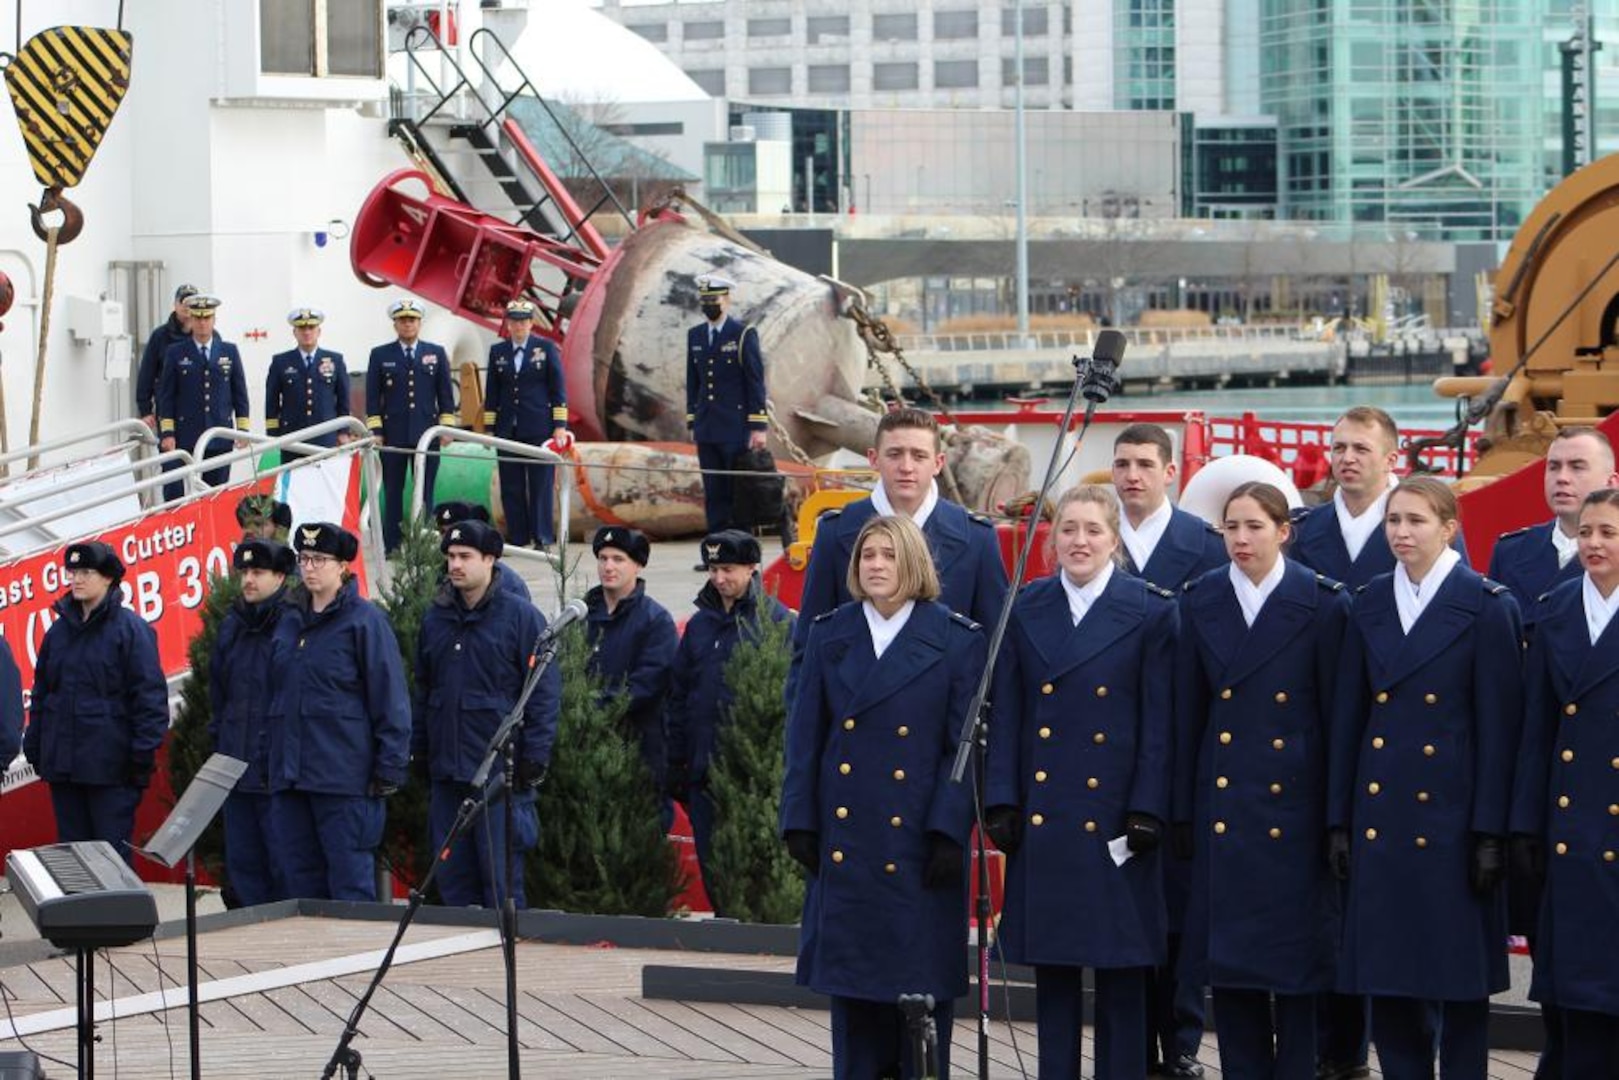 The Coast Guard Academy Glee Club performs acapella holiday music for hundreds of spectators as part of Chicago's Christmas Ship ceremonies Dec. 4, 2021, as senior officers and Mackinaw crew members look on. The performance was part of the 22nd annual Christmas Ship celebration, which delivered 1,200 Christmas trees to Chicago families that otherwise would not have had one. U.S. Coast Guard photo by Matthew Thompson, U.S. Coast Guard Auxiliary.